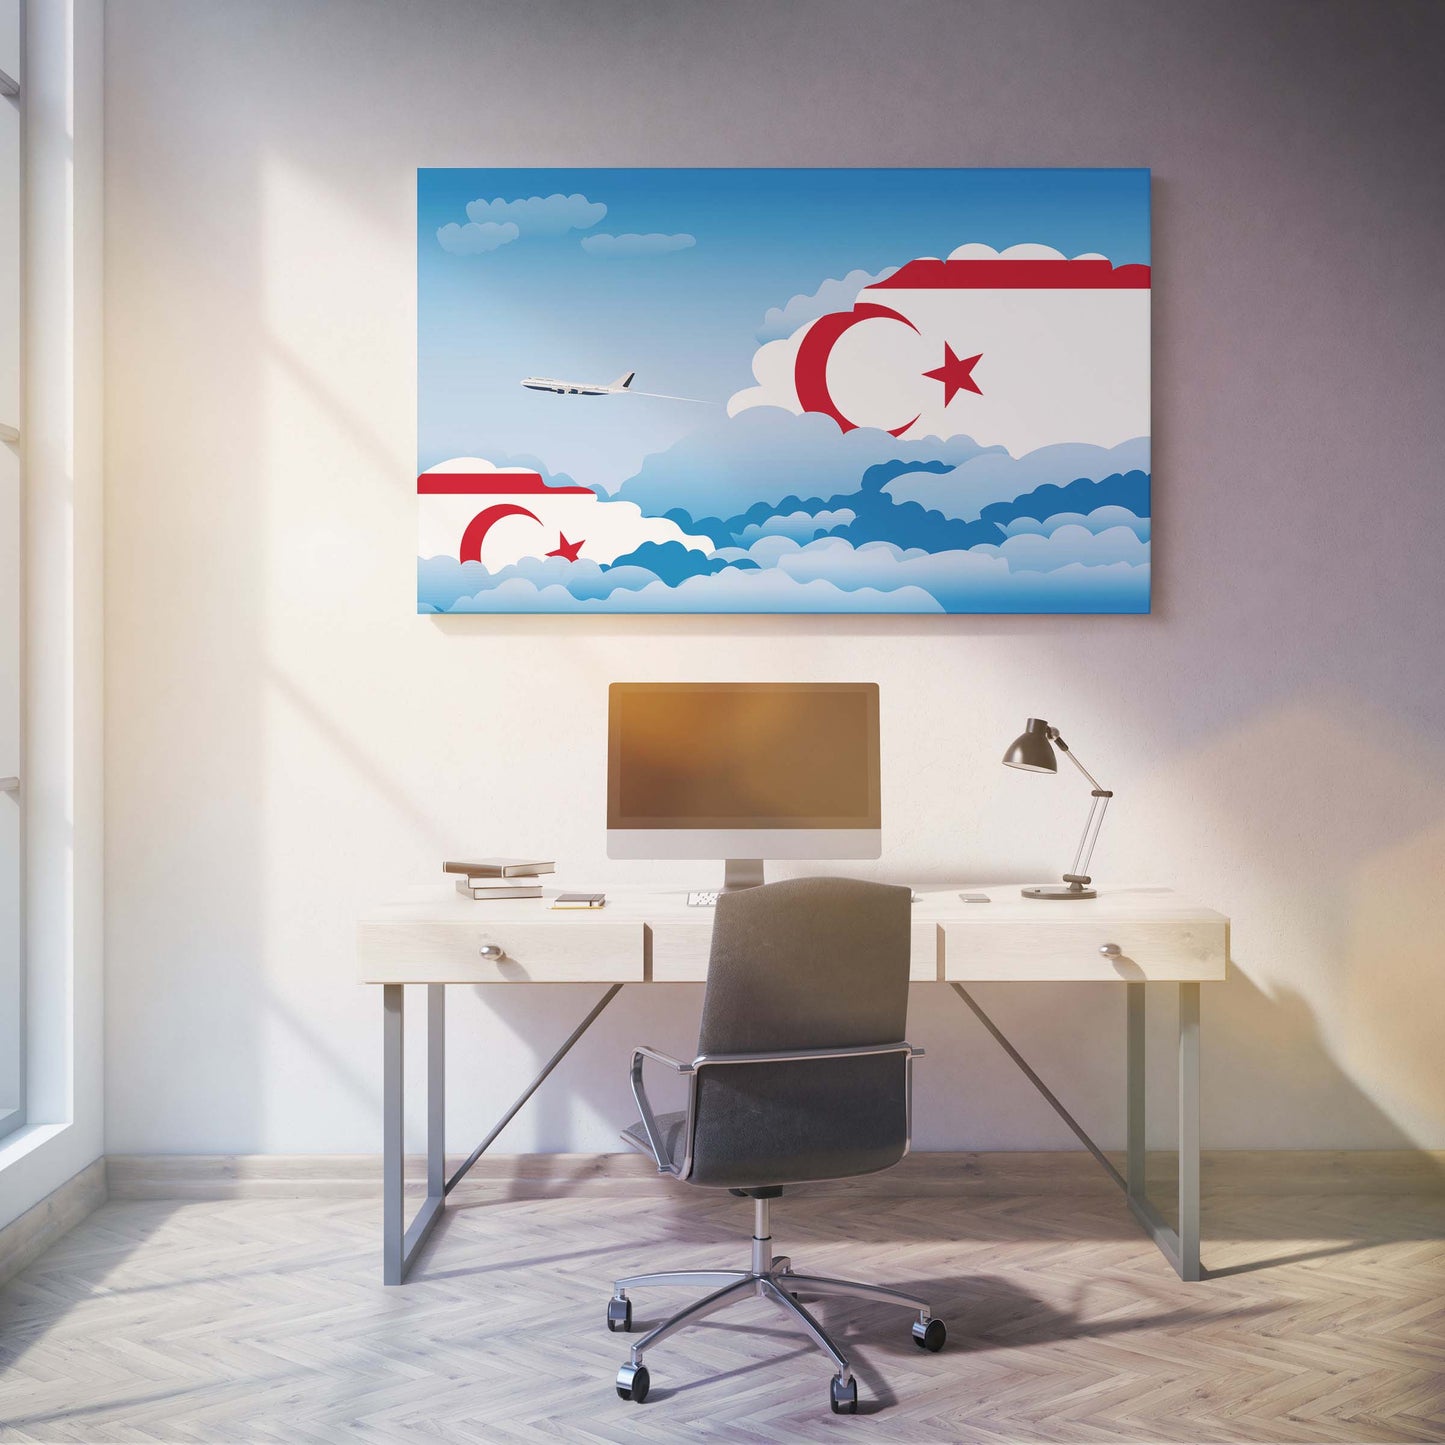 Turkish Republic of Northern Cyprus Flags Day Clouds Canvas Print Framed